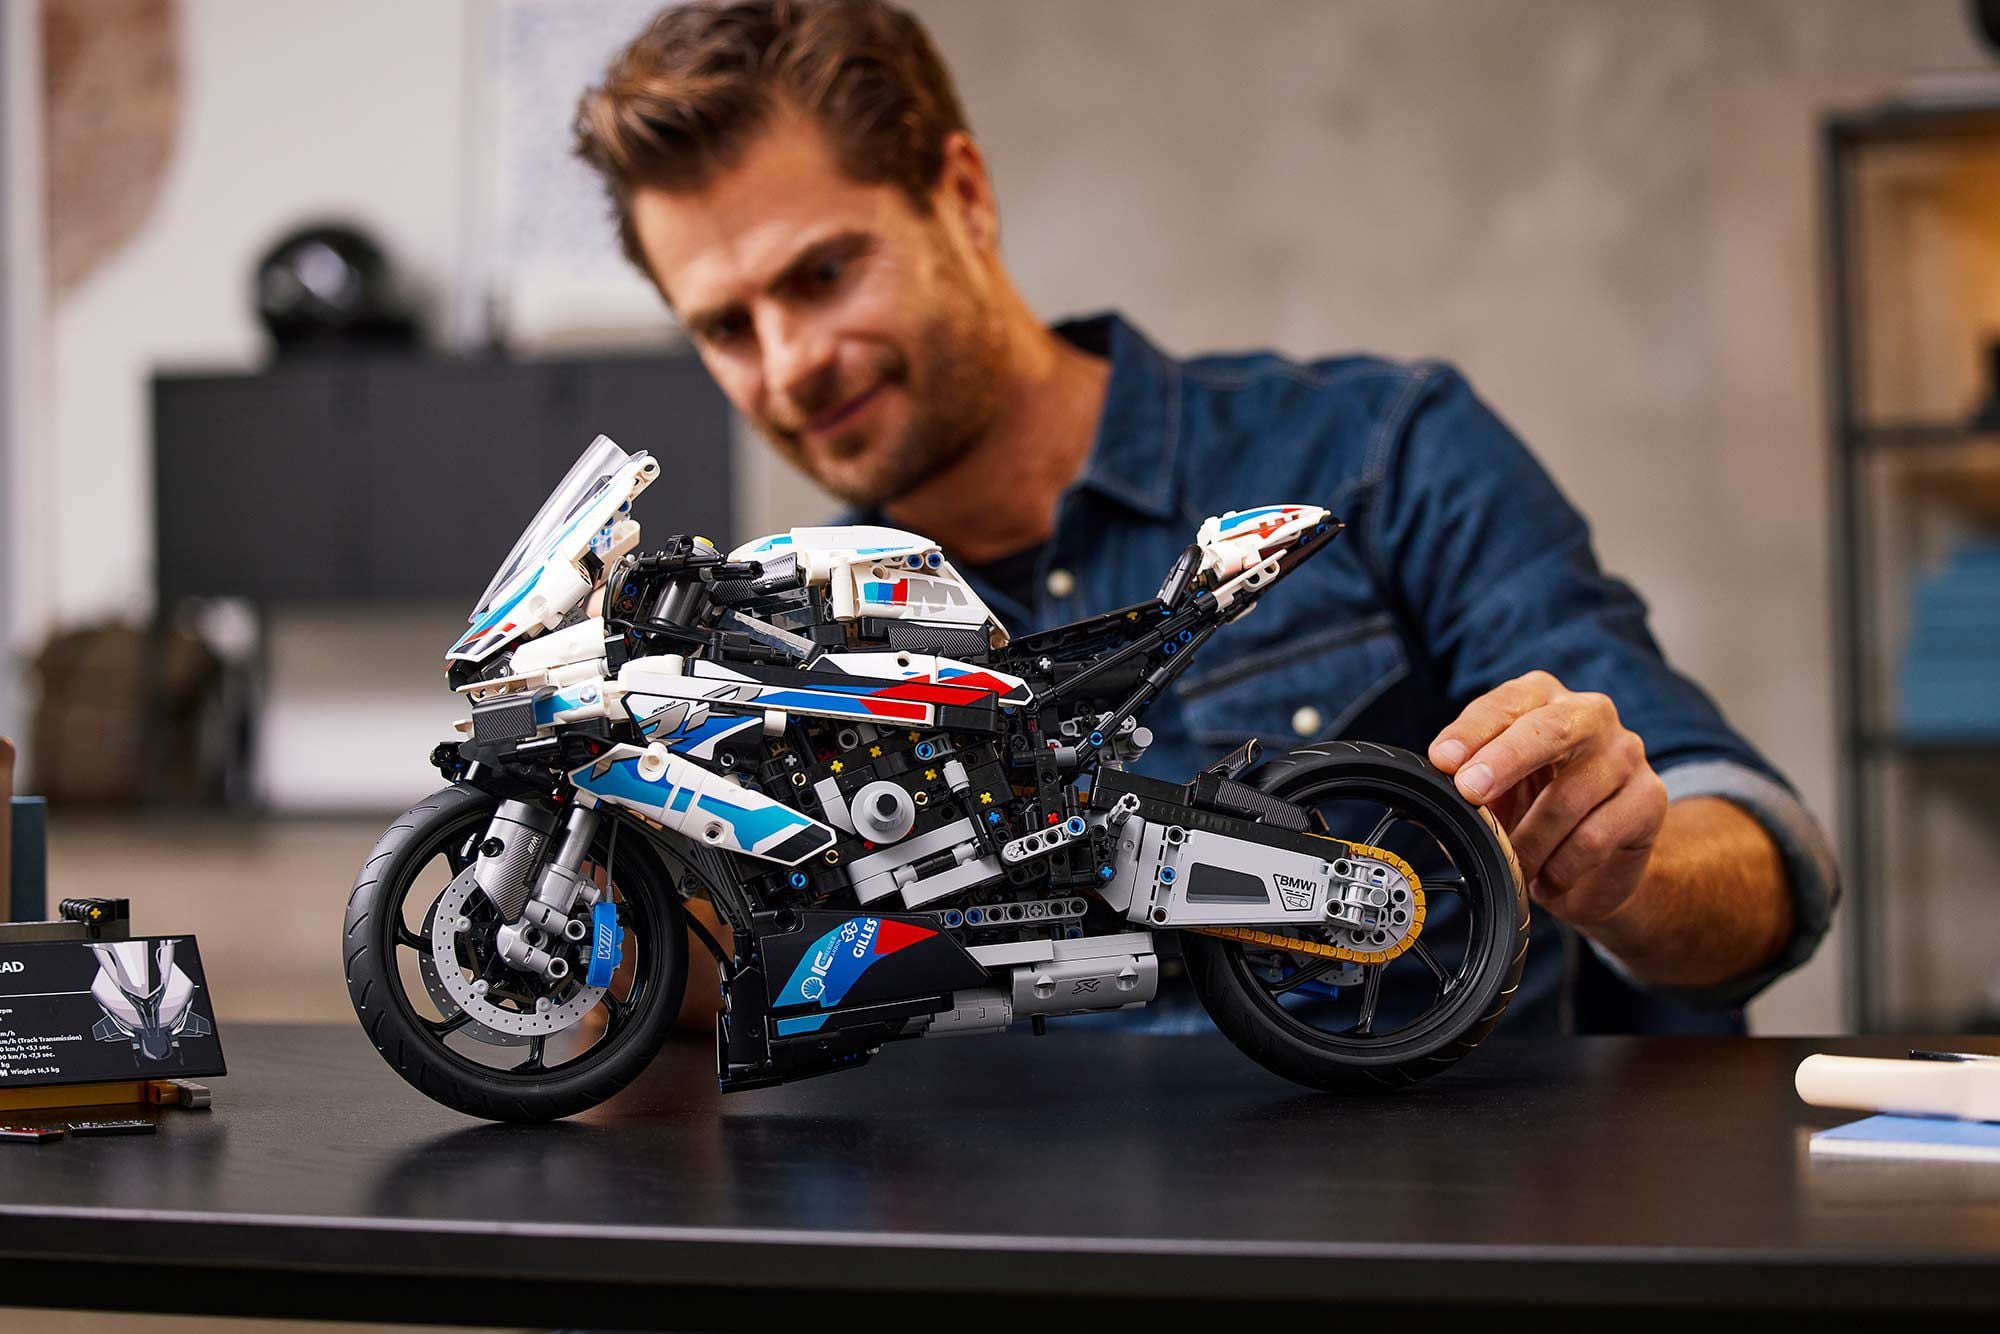 The detailed Lego set for the M 1000 RR was introduced earlier this year and is nothing short of awesome.